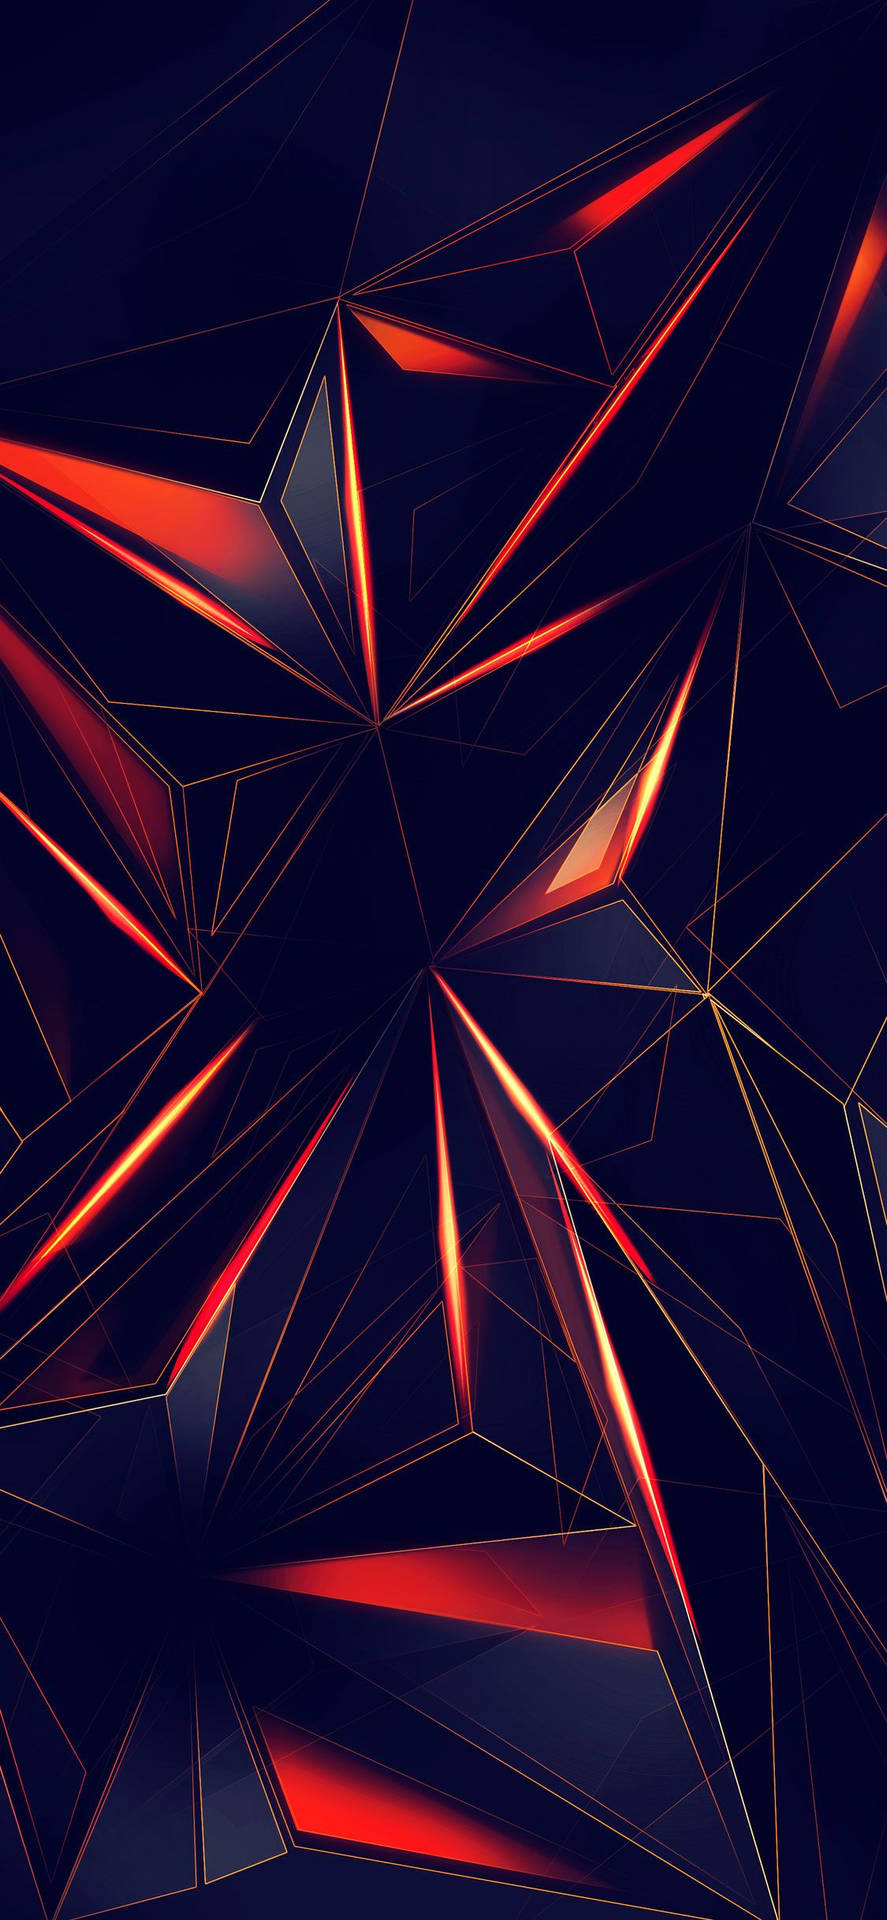 Striking Black And Red Diamond Pattern On An Iphone 11